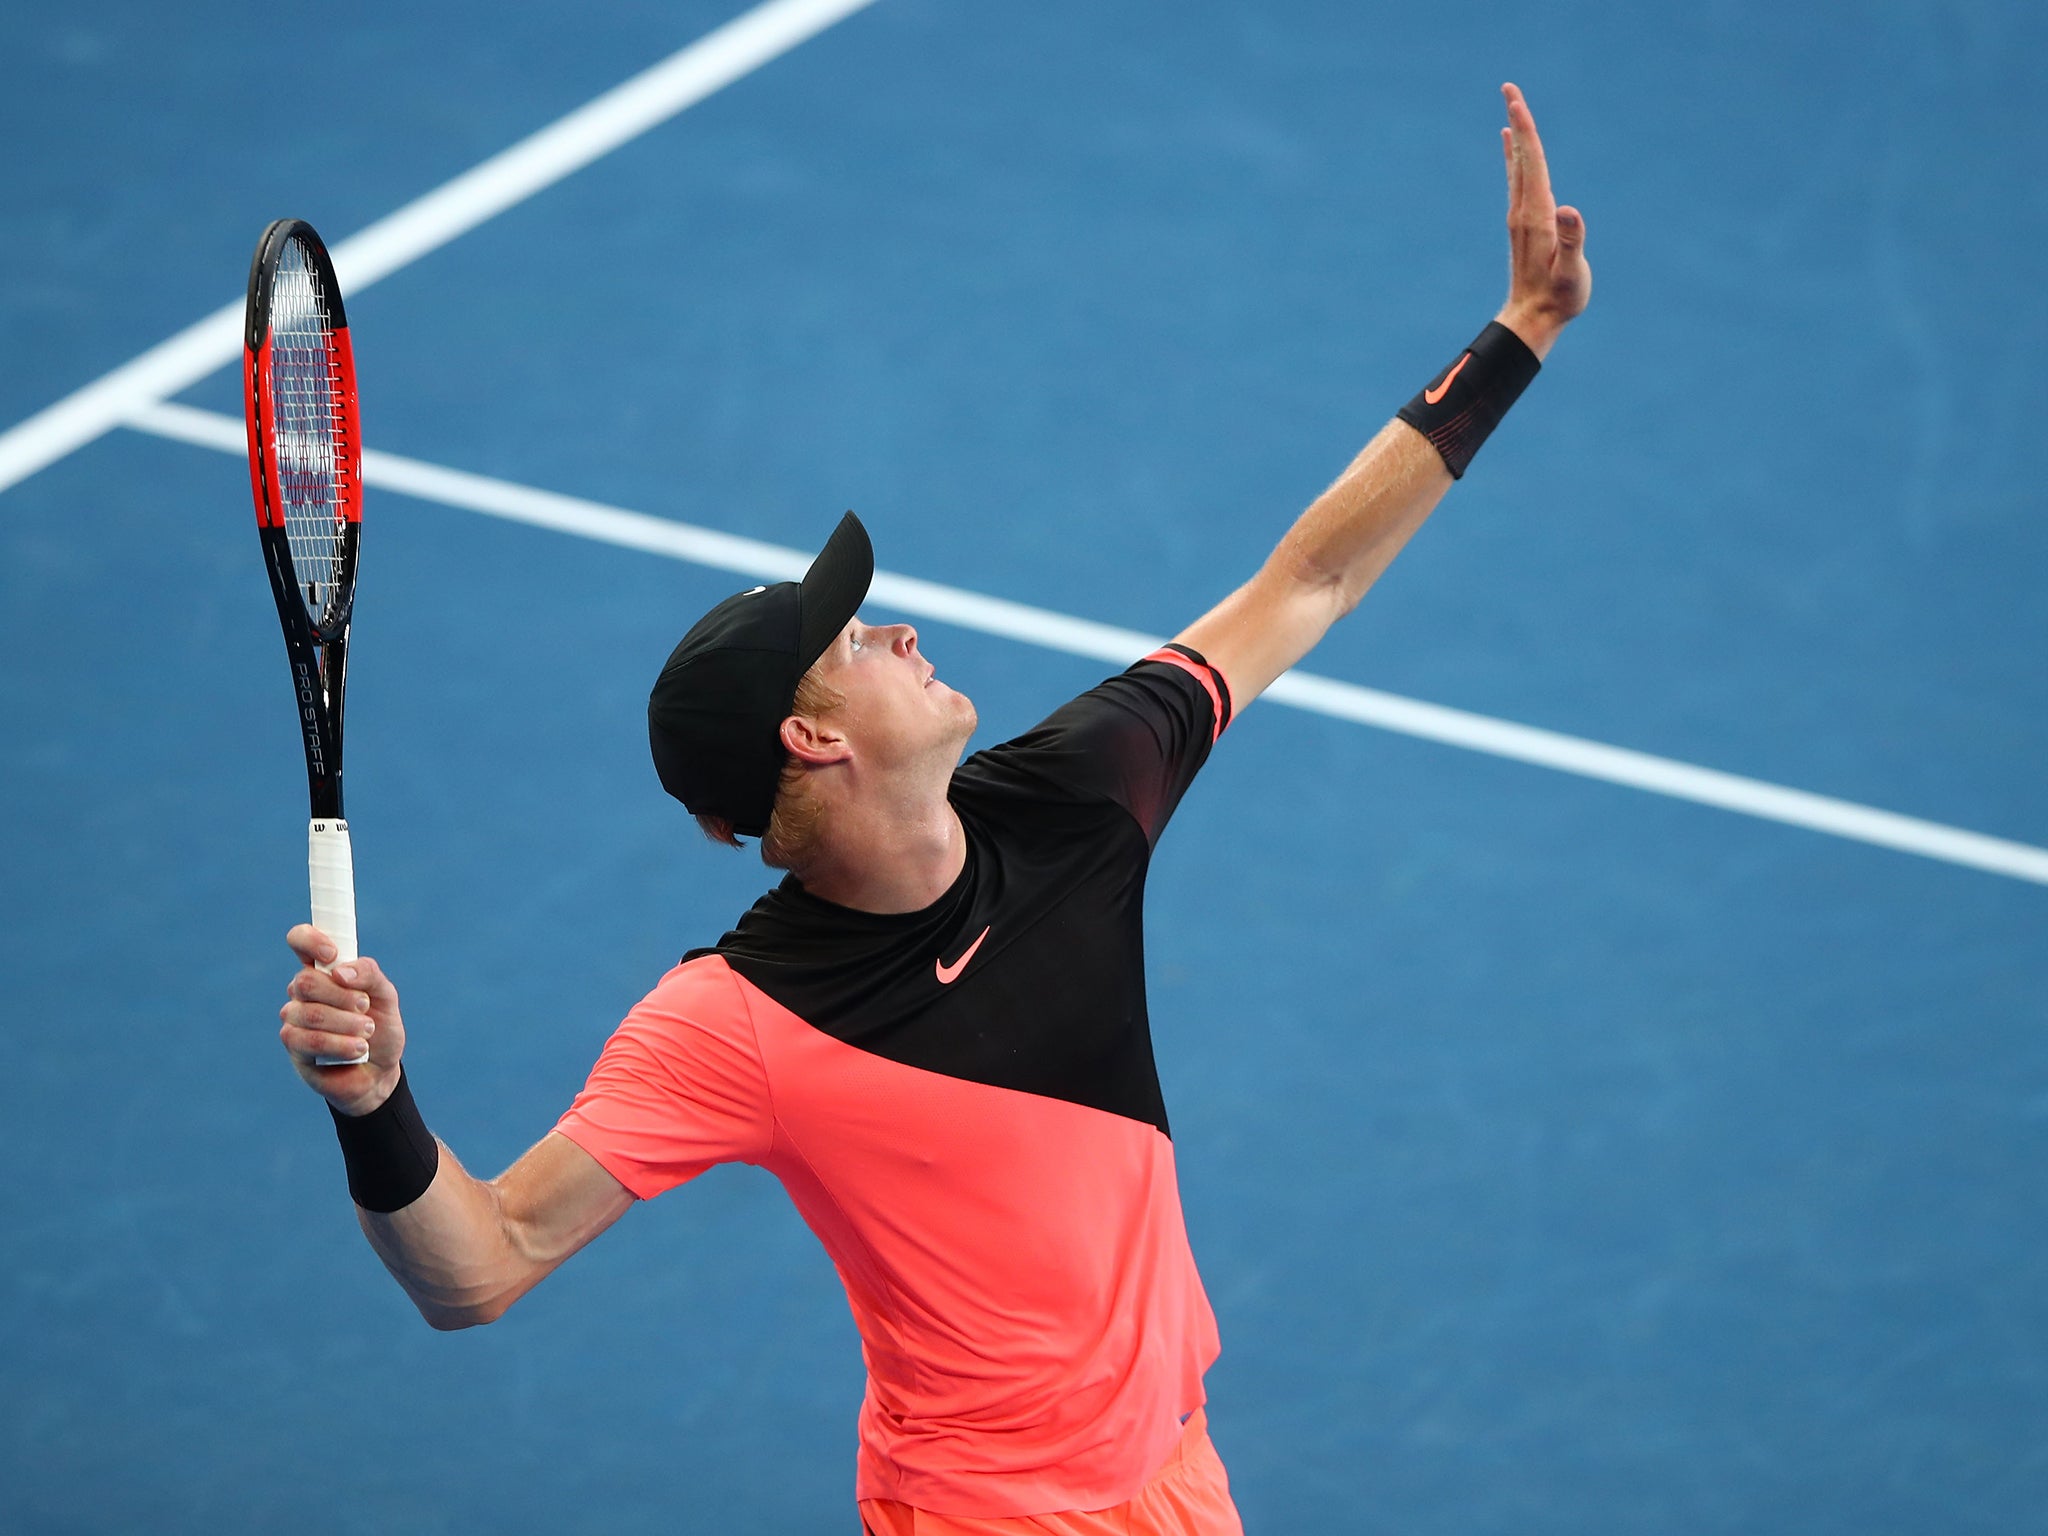 Edmund hit 25 aces to help him to victory